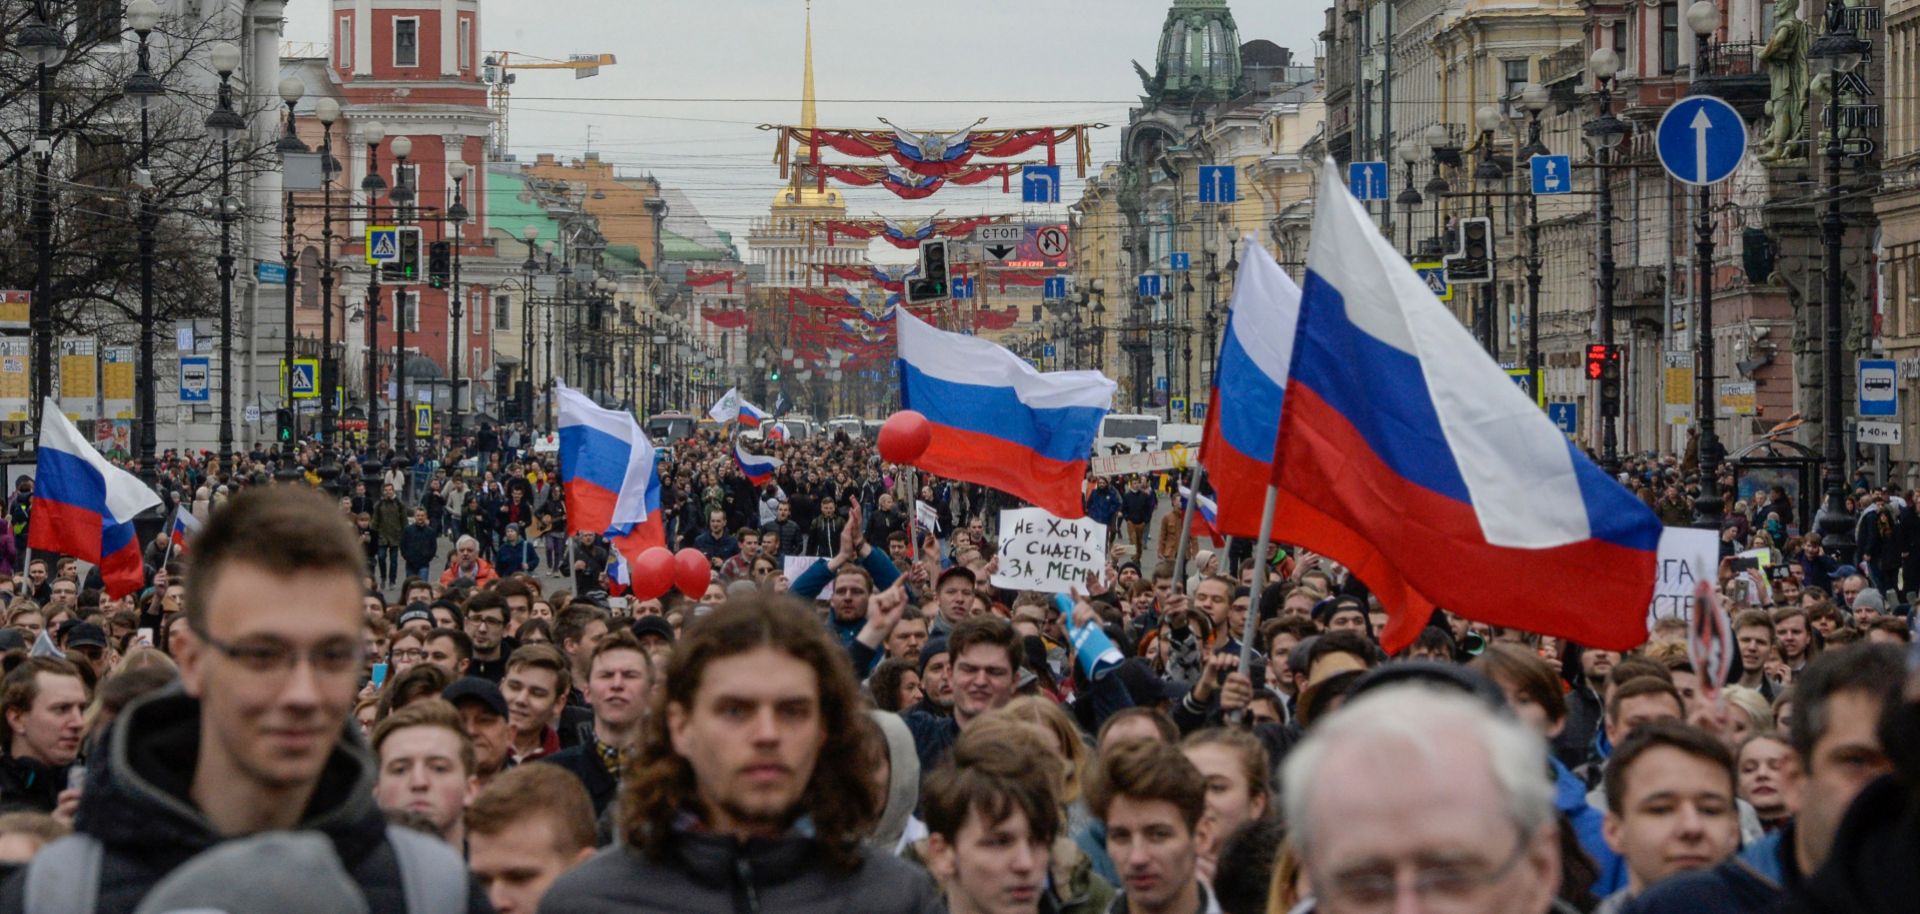 Opposition supporters attend an anti-Putin rally called by opposition leader Alexei Navalny on May 5, 2018, in Saint Petersburg, two days before Vladimir Putin's inauguration for a fourth term as president. This week, Navalny again is calling for protests, this time over a planned increase in the Russian retirement age.